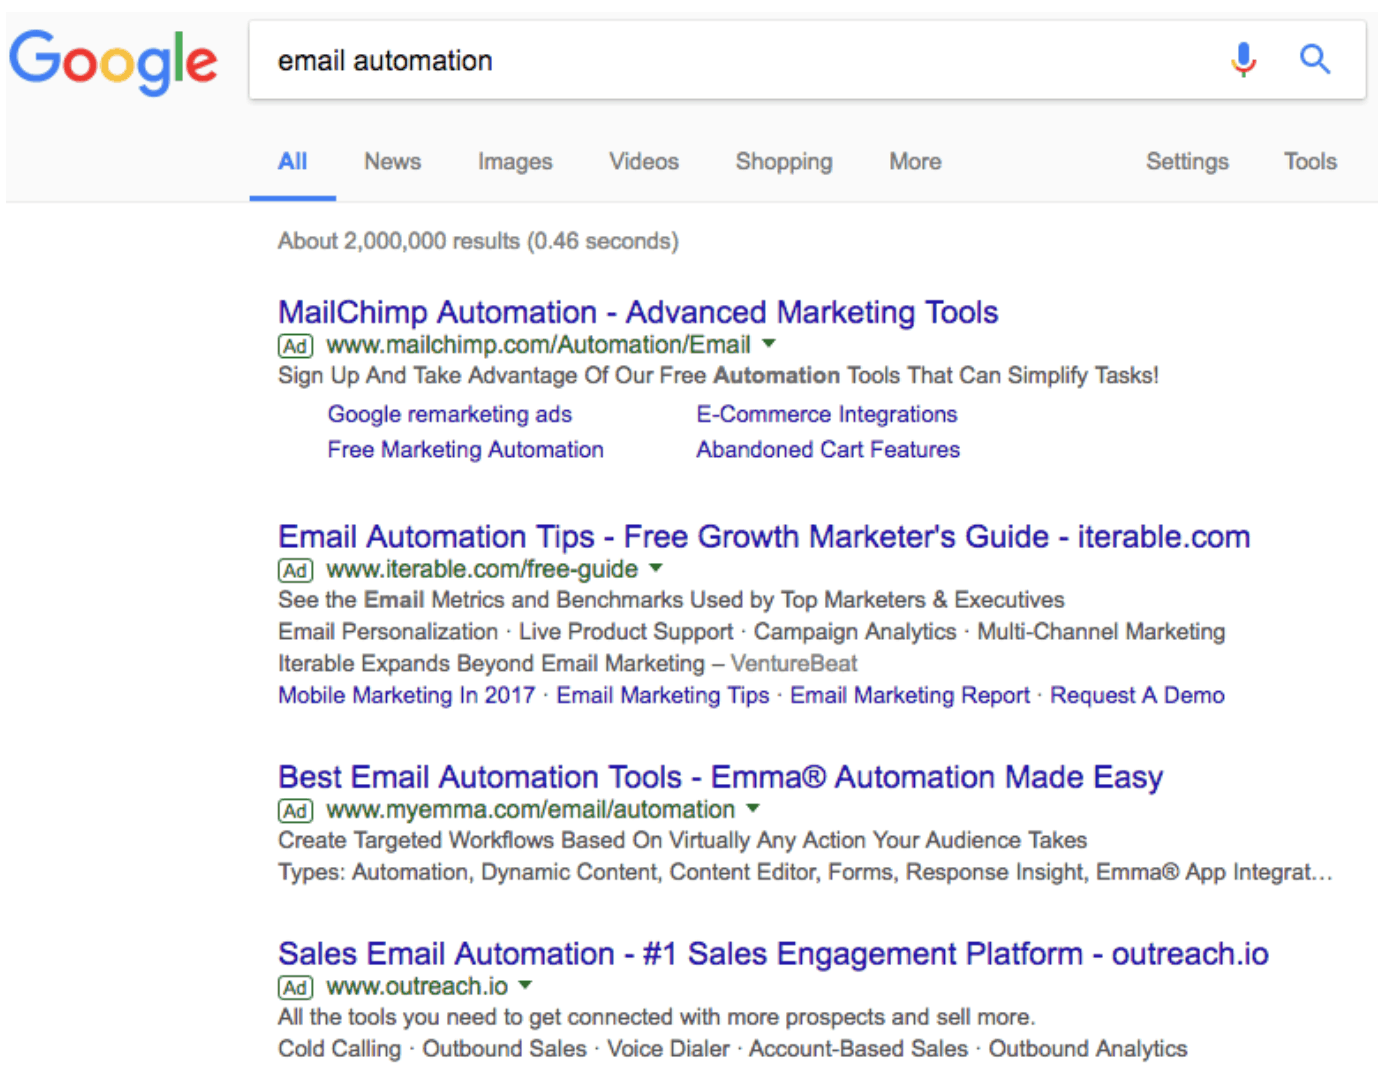 A Google SERP for the query email automation to explore marketing ideas.